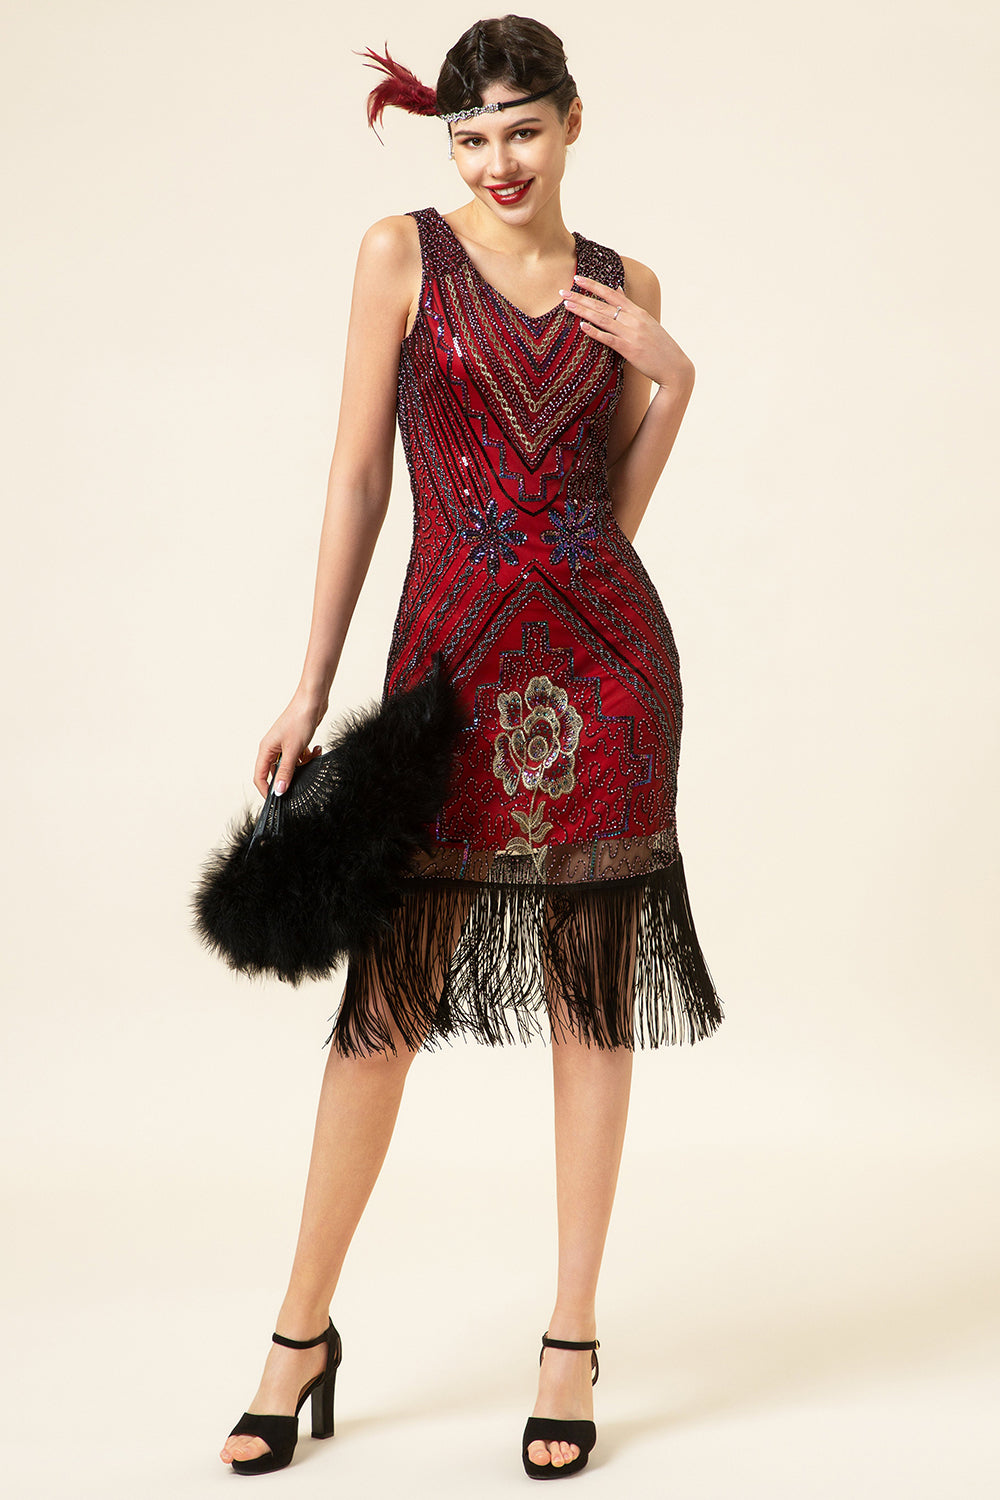 Burgundy Sequined Fringes 1920s Gatsby Flapper Dress with 20s Accessories Set